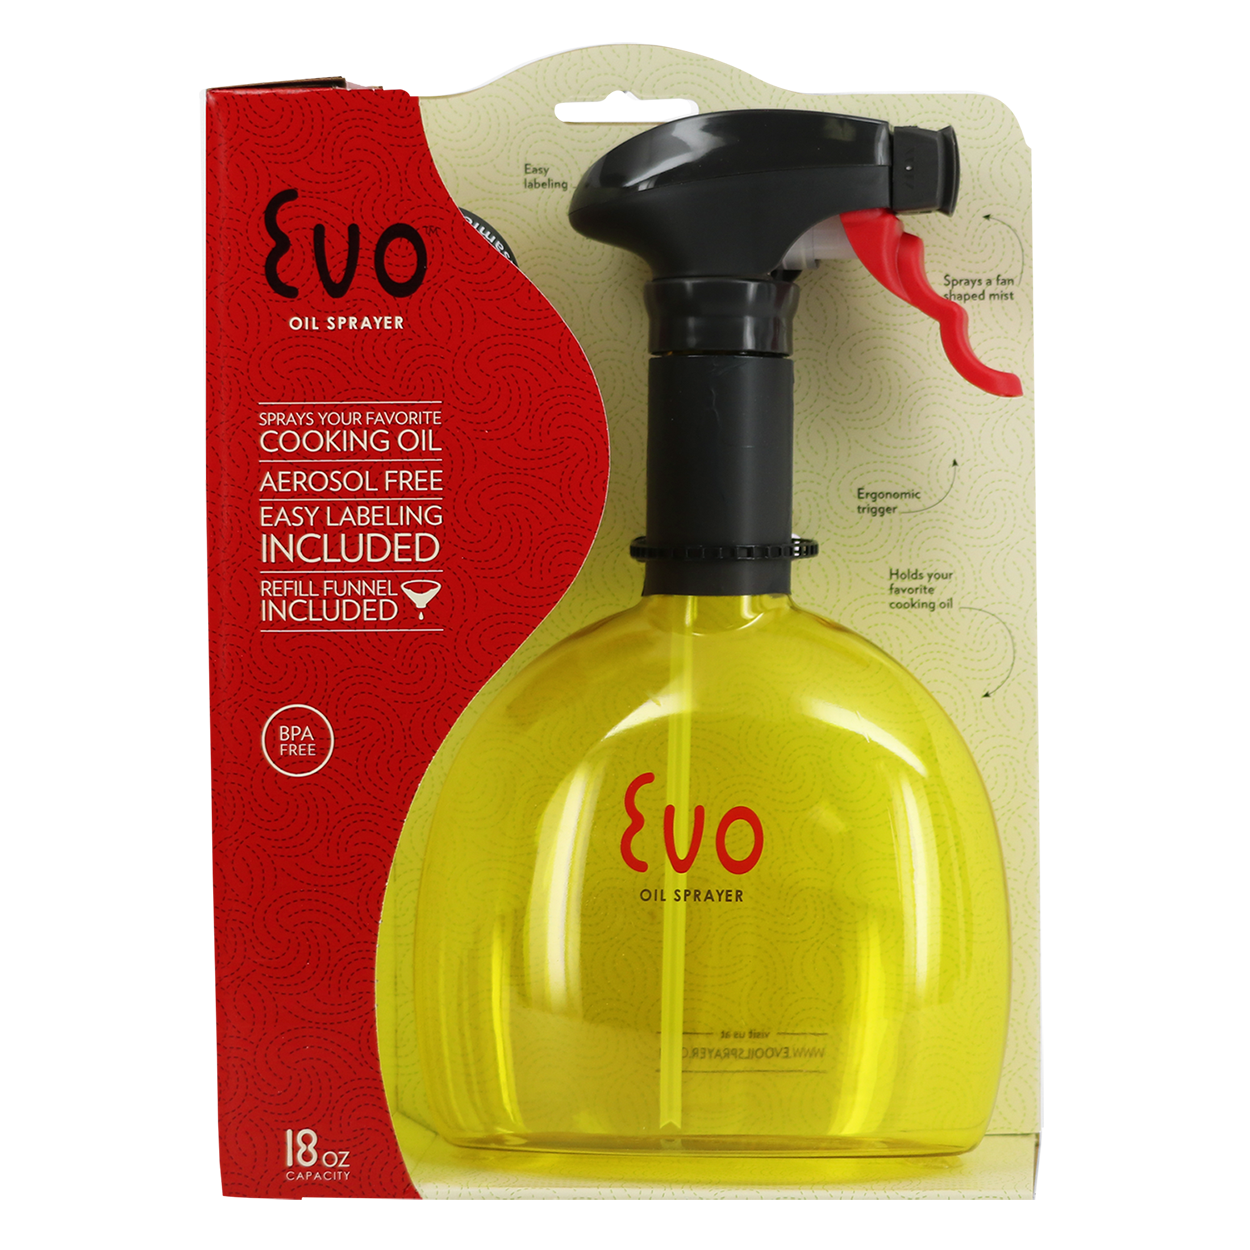 8 OZ.NON AEROSOL OIL TRIGGER SPRAYERS IN GIFT BOXES 3 Details about   EVO SET OF